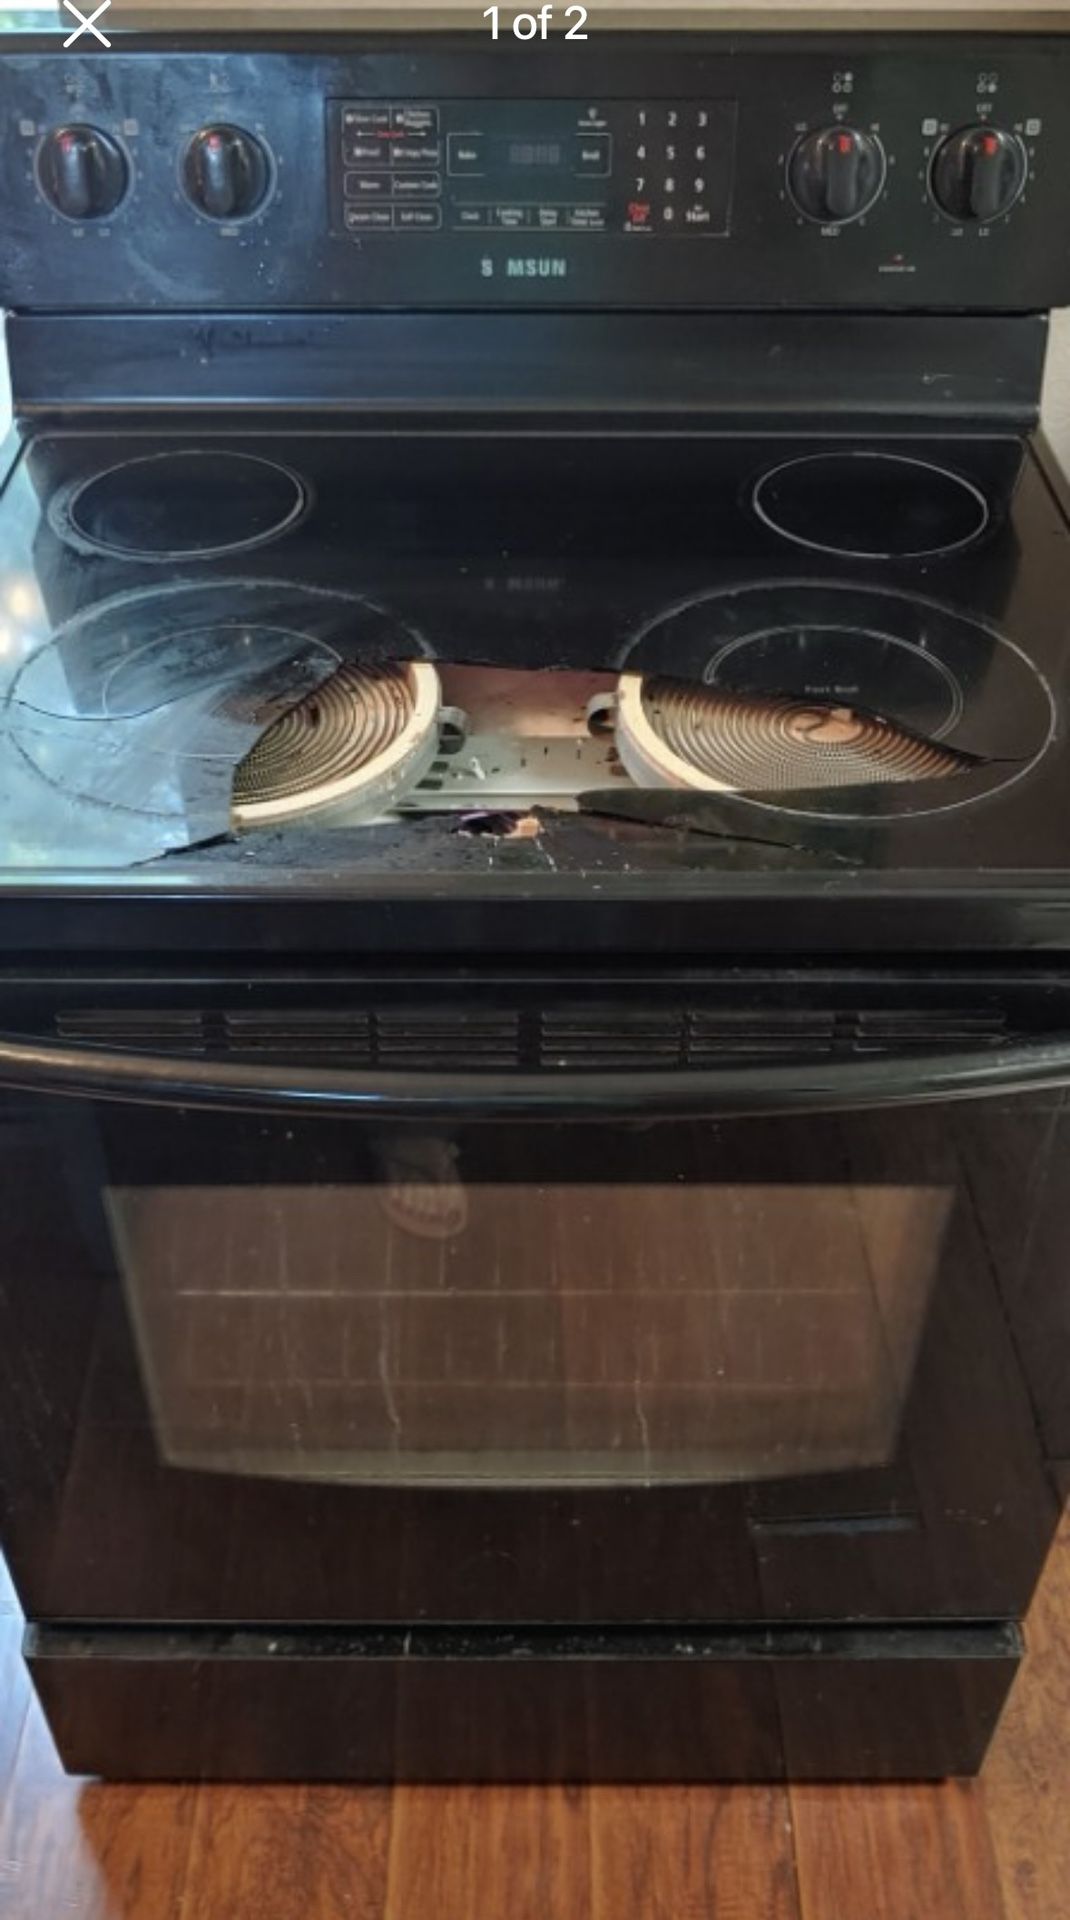 Samsung Stove with shattered Glass top